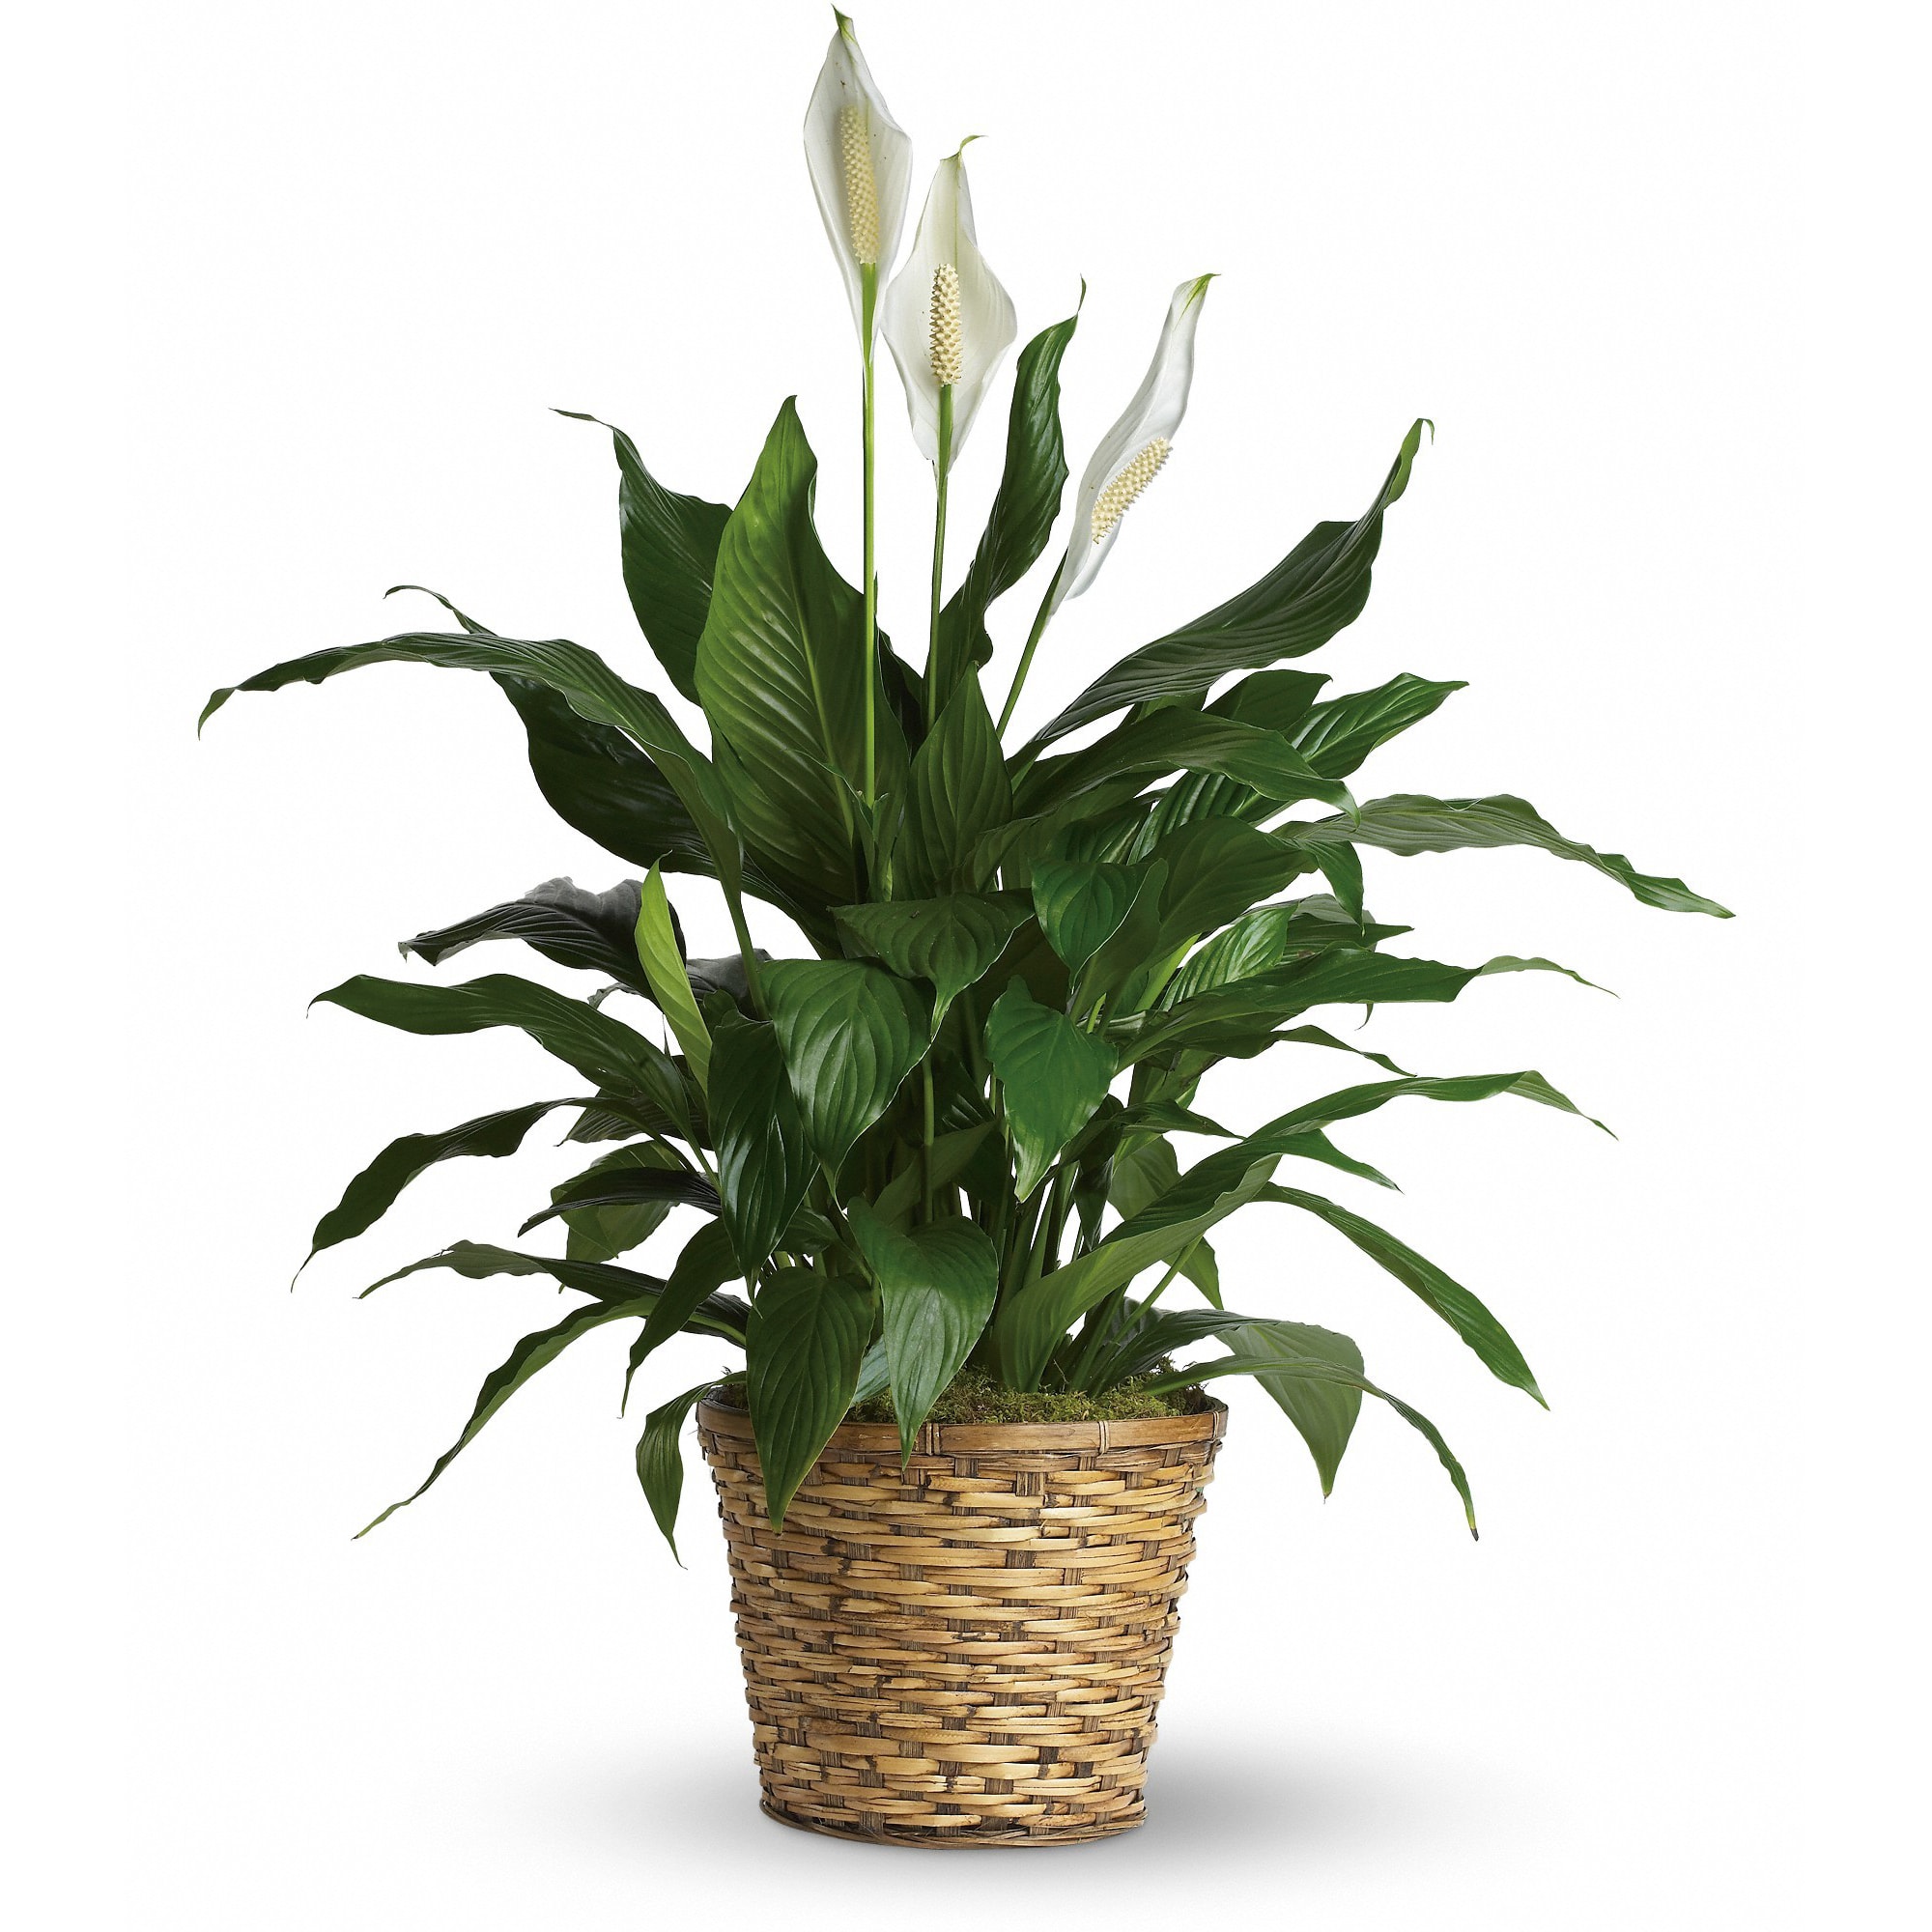 Simply Elegant Spathiphyllum - Medium A108 - Known for its indoor beauty and ability to clear the air of contaminants, this brilliant green plant with dazzling white blossoms makes a perfect gift for almost any occasion. low-maintenance. High quality. Bet you never knew delivering elegance could be this simple.  This spathiphyllum comes in an 8&quot; woven wicker basket. It's a great medium for delivering vitality.  Approximately 30 1/2&quot; W x 37&quot; H  Orientation: N/A  As Shown : T105-2A